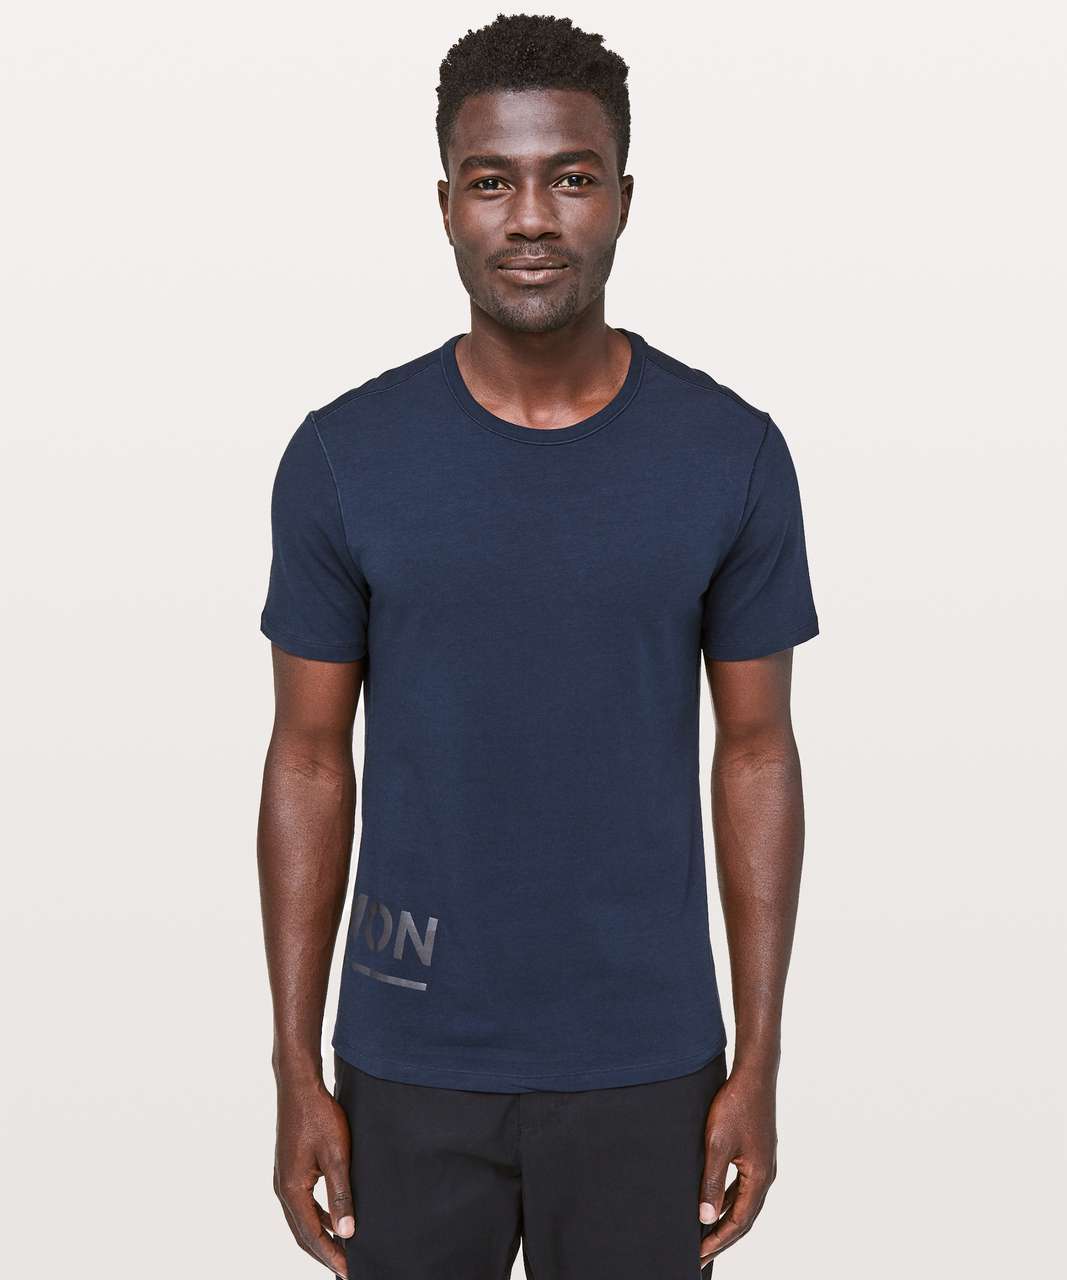 Lululemon 5 Year Basic T *20Y Collection - True Navy